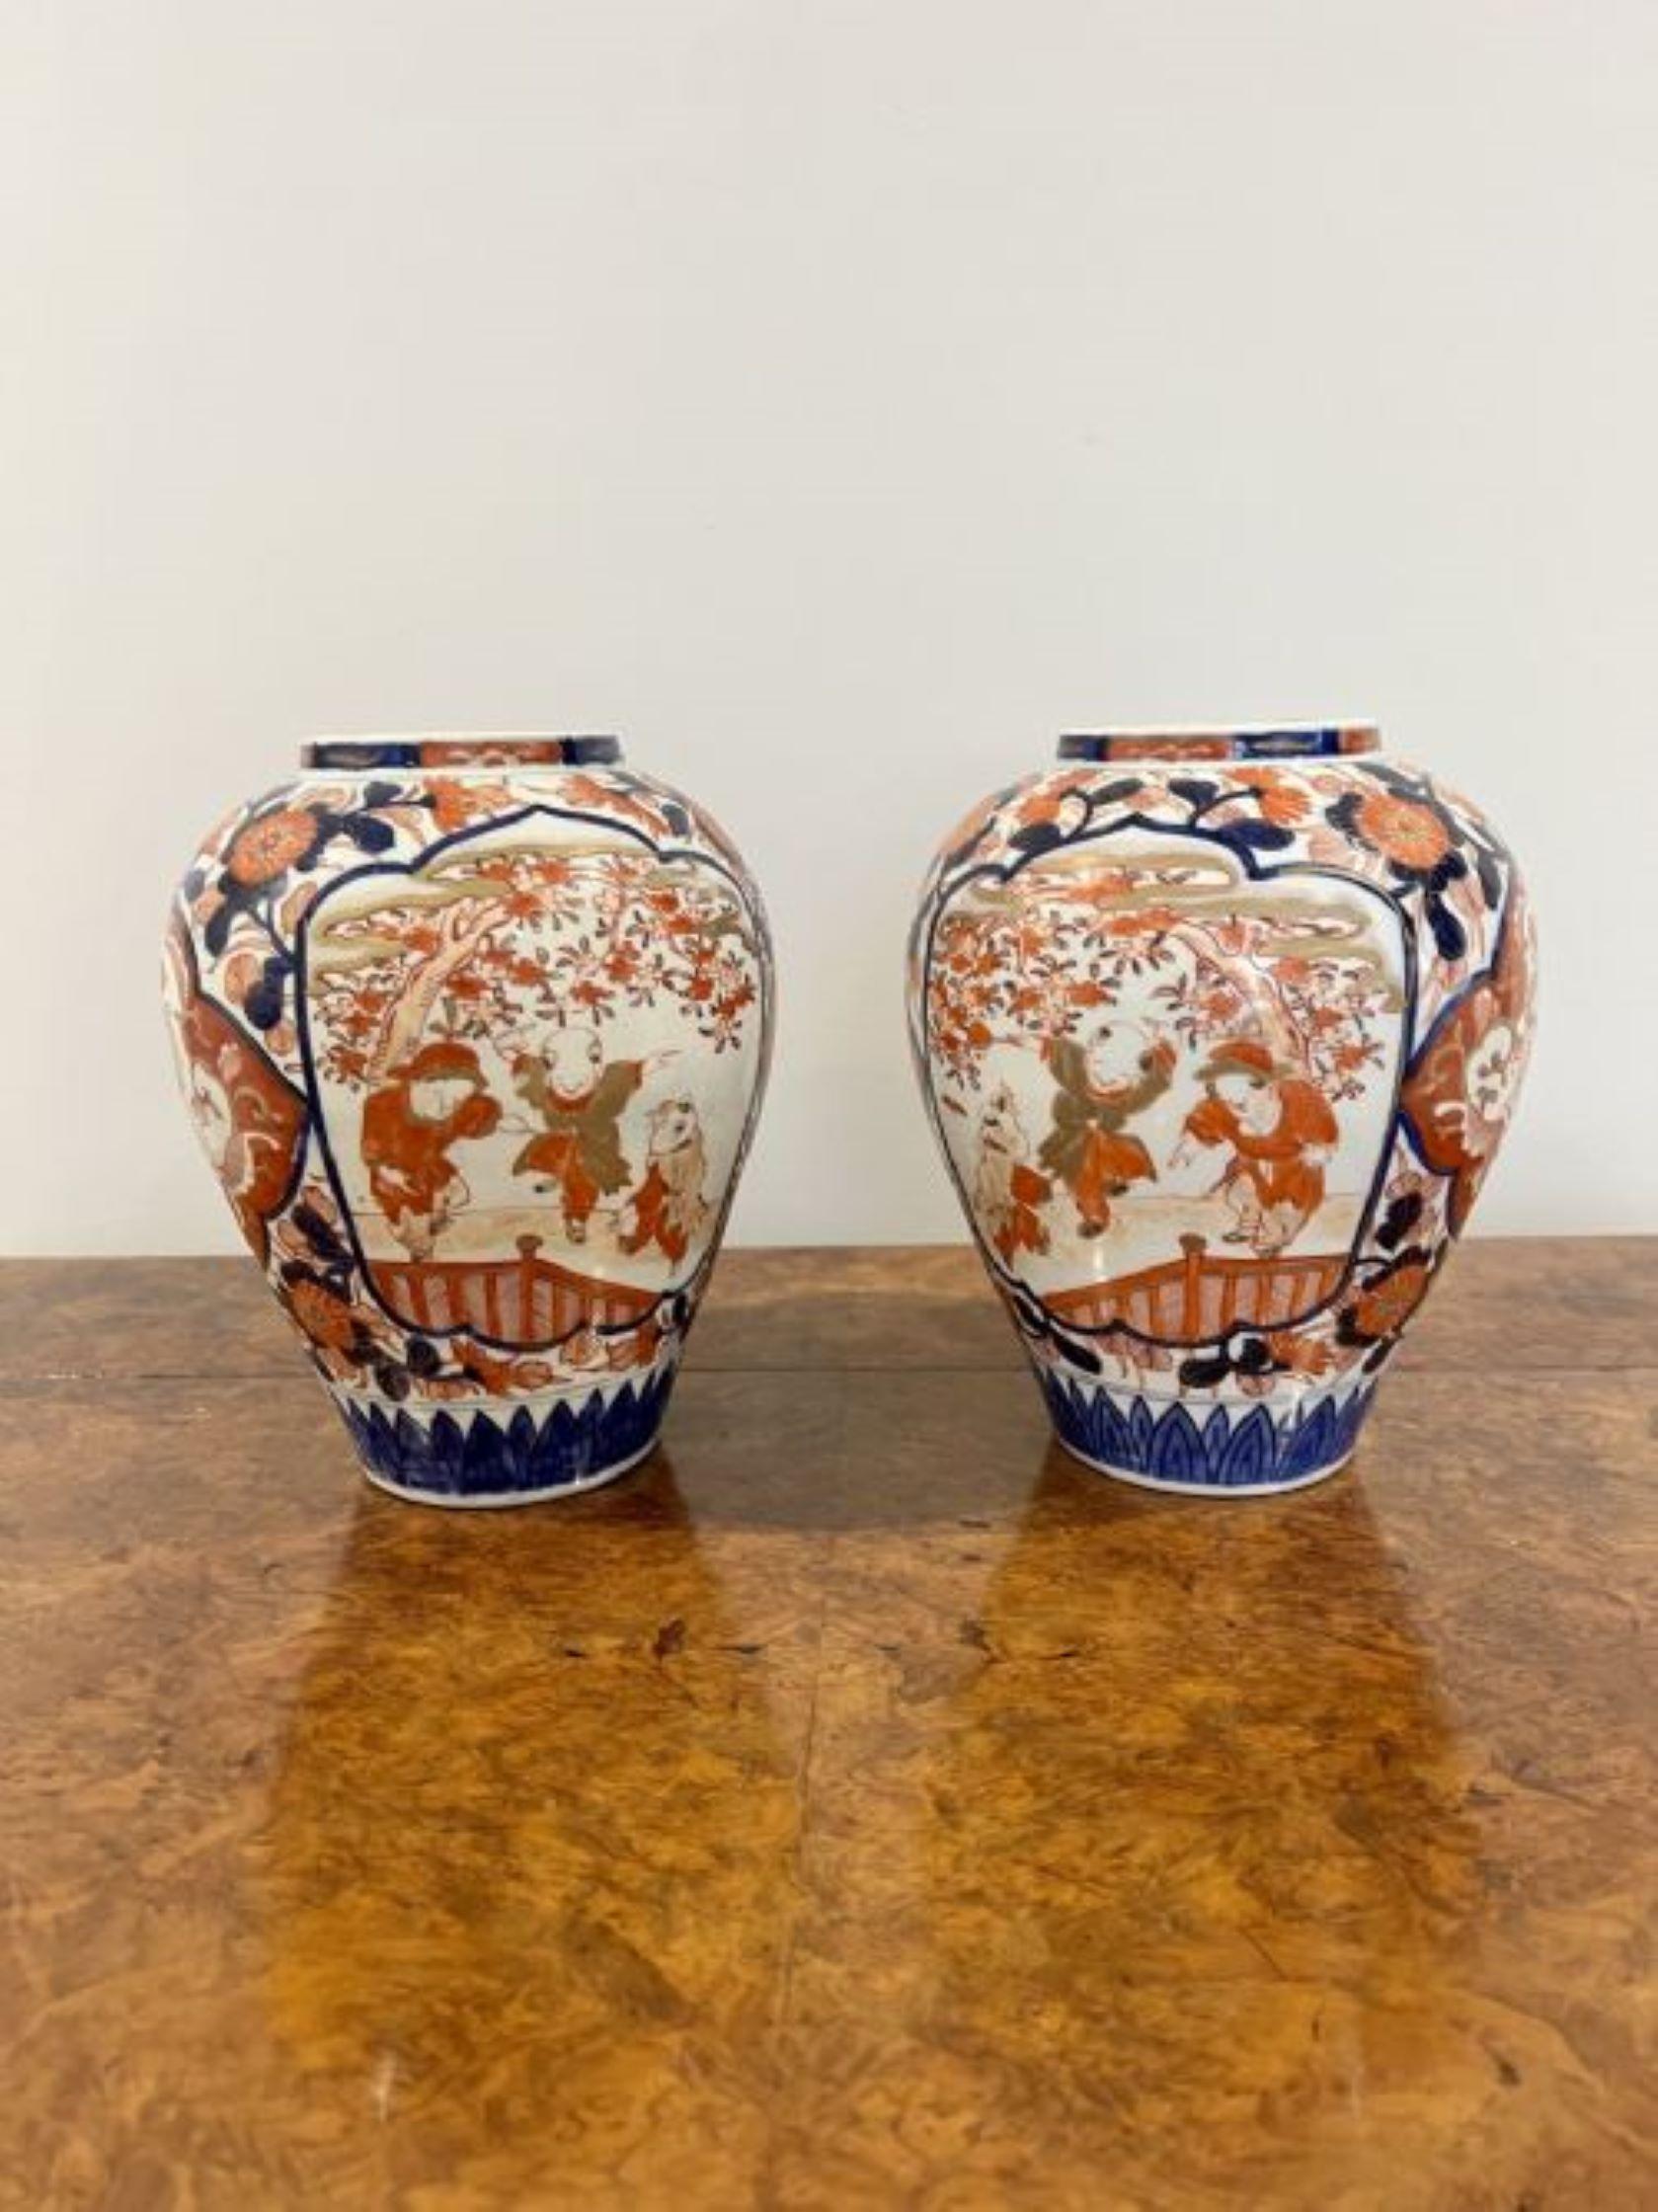 Quality pair of antique Japanese Imari vases having a pair of quality antique Japanese Imari vases with wonderful hand painted decoration with people, flowers, leaves, trees and scrolls in fantastic gold, red, orange, white and blue colours 